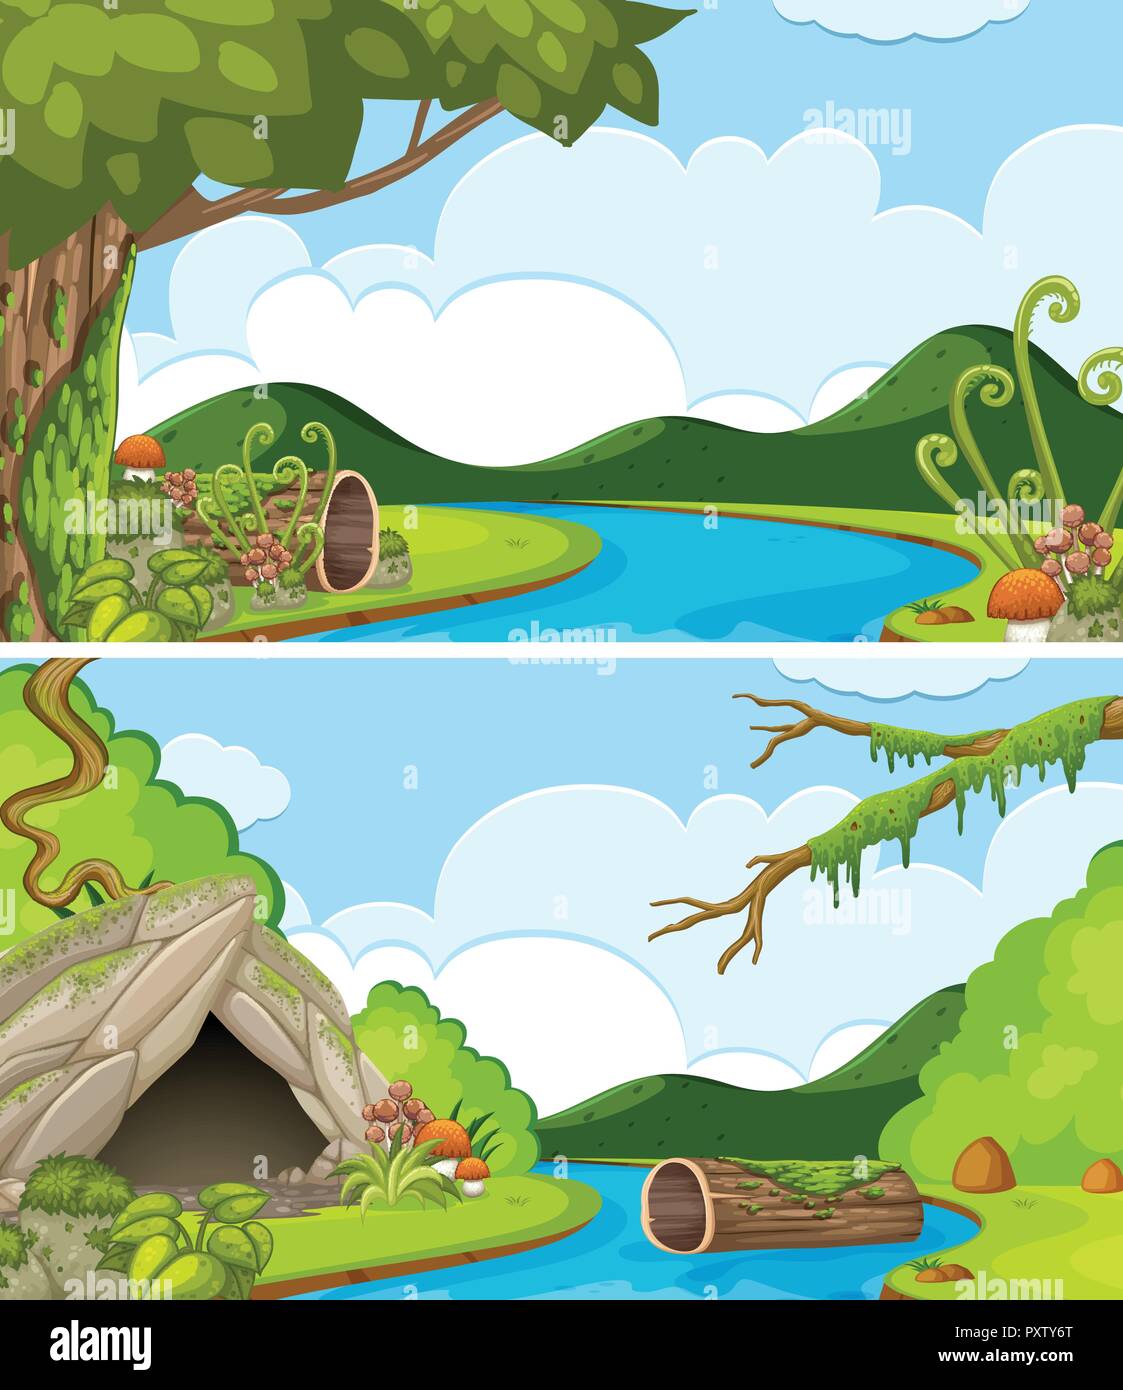 Two river scenes with mountains in background illustration Stock Vector